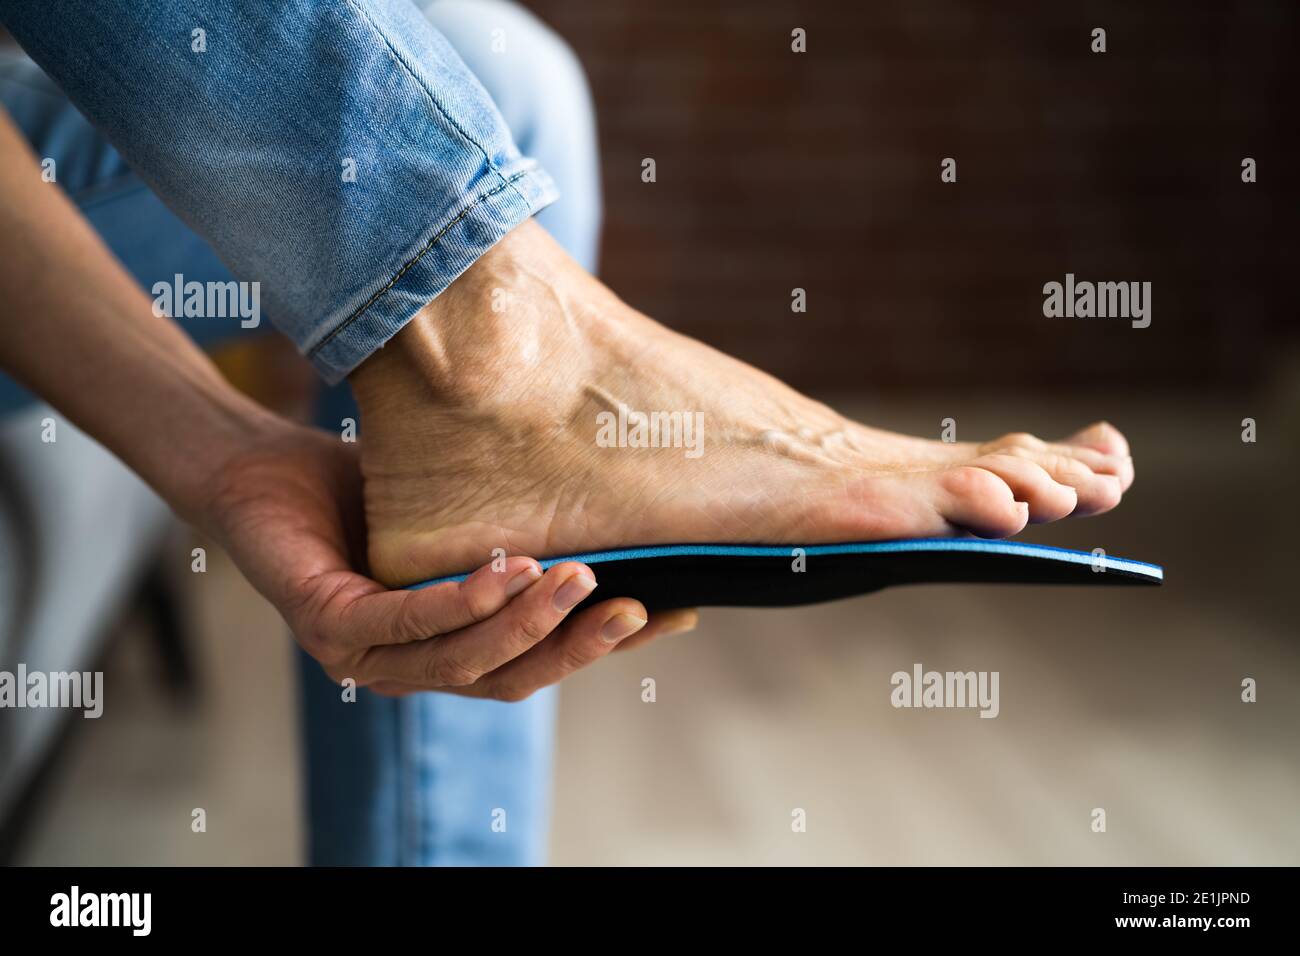 Orthopedic Shoe Sole For Flat Foot Recovery Stock Photo